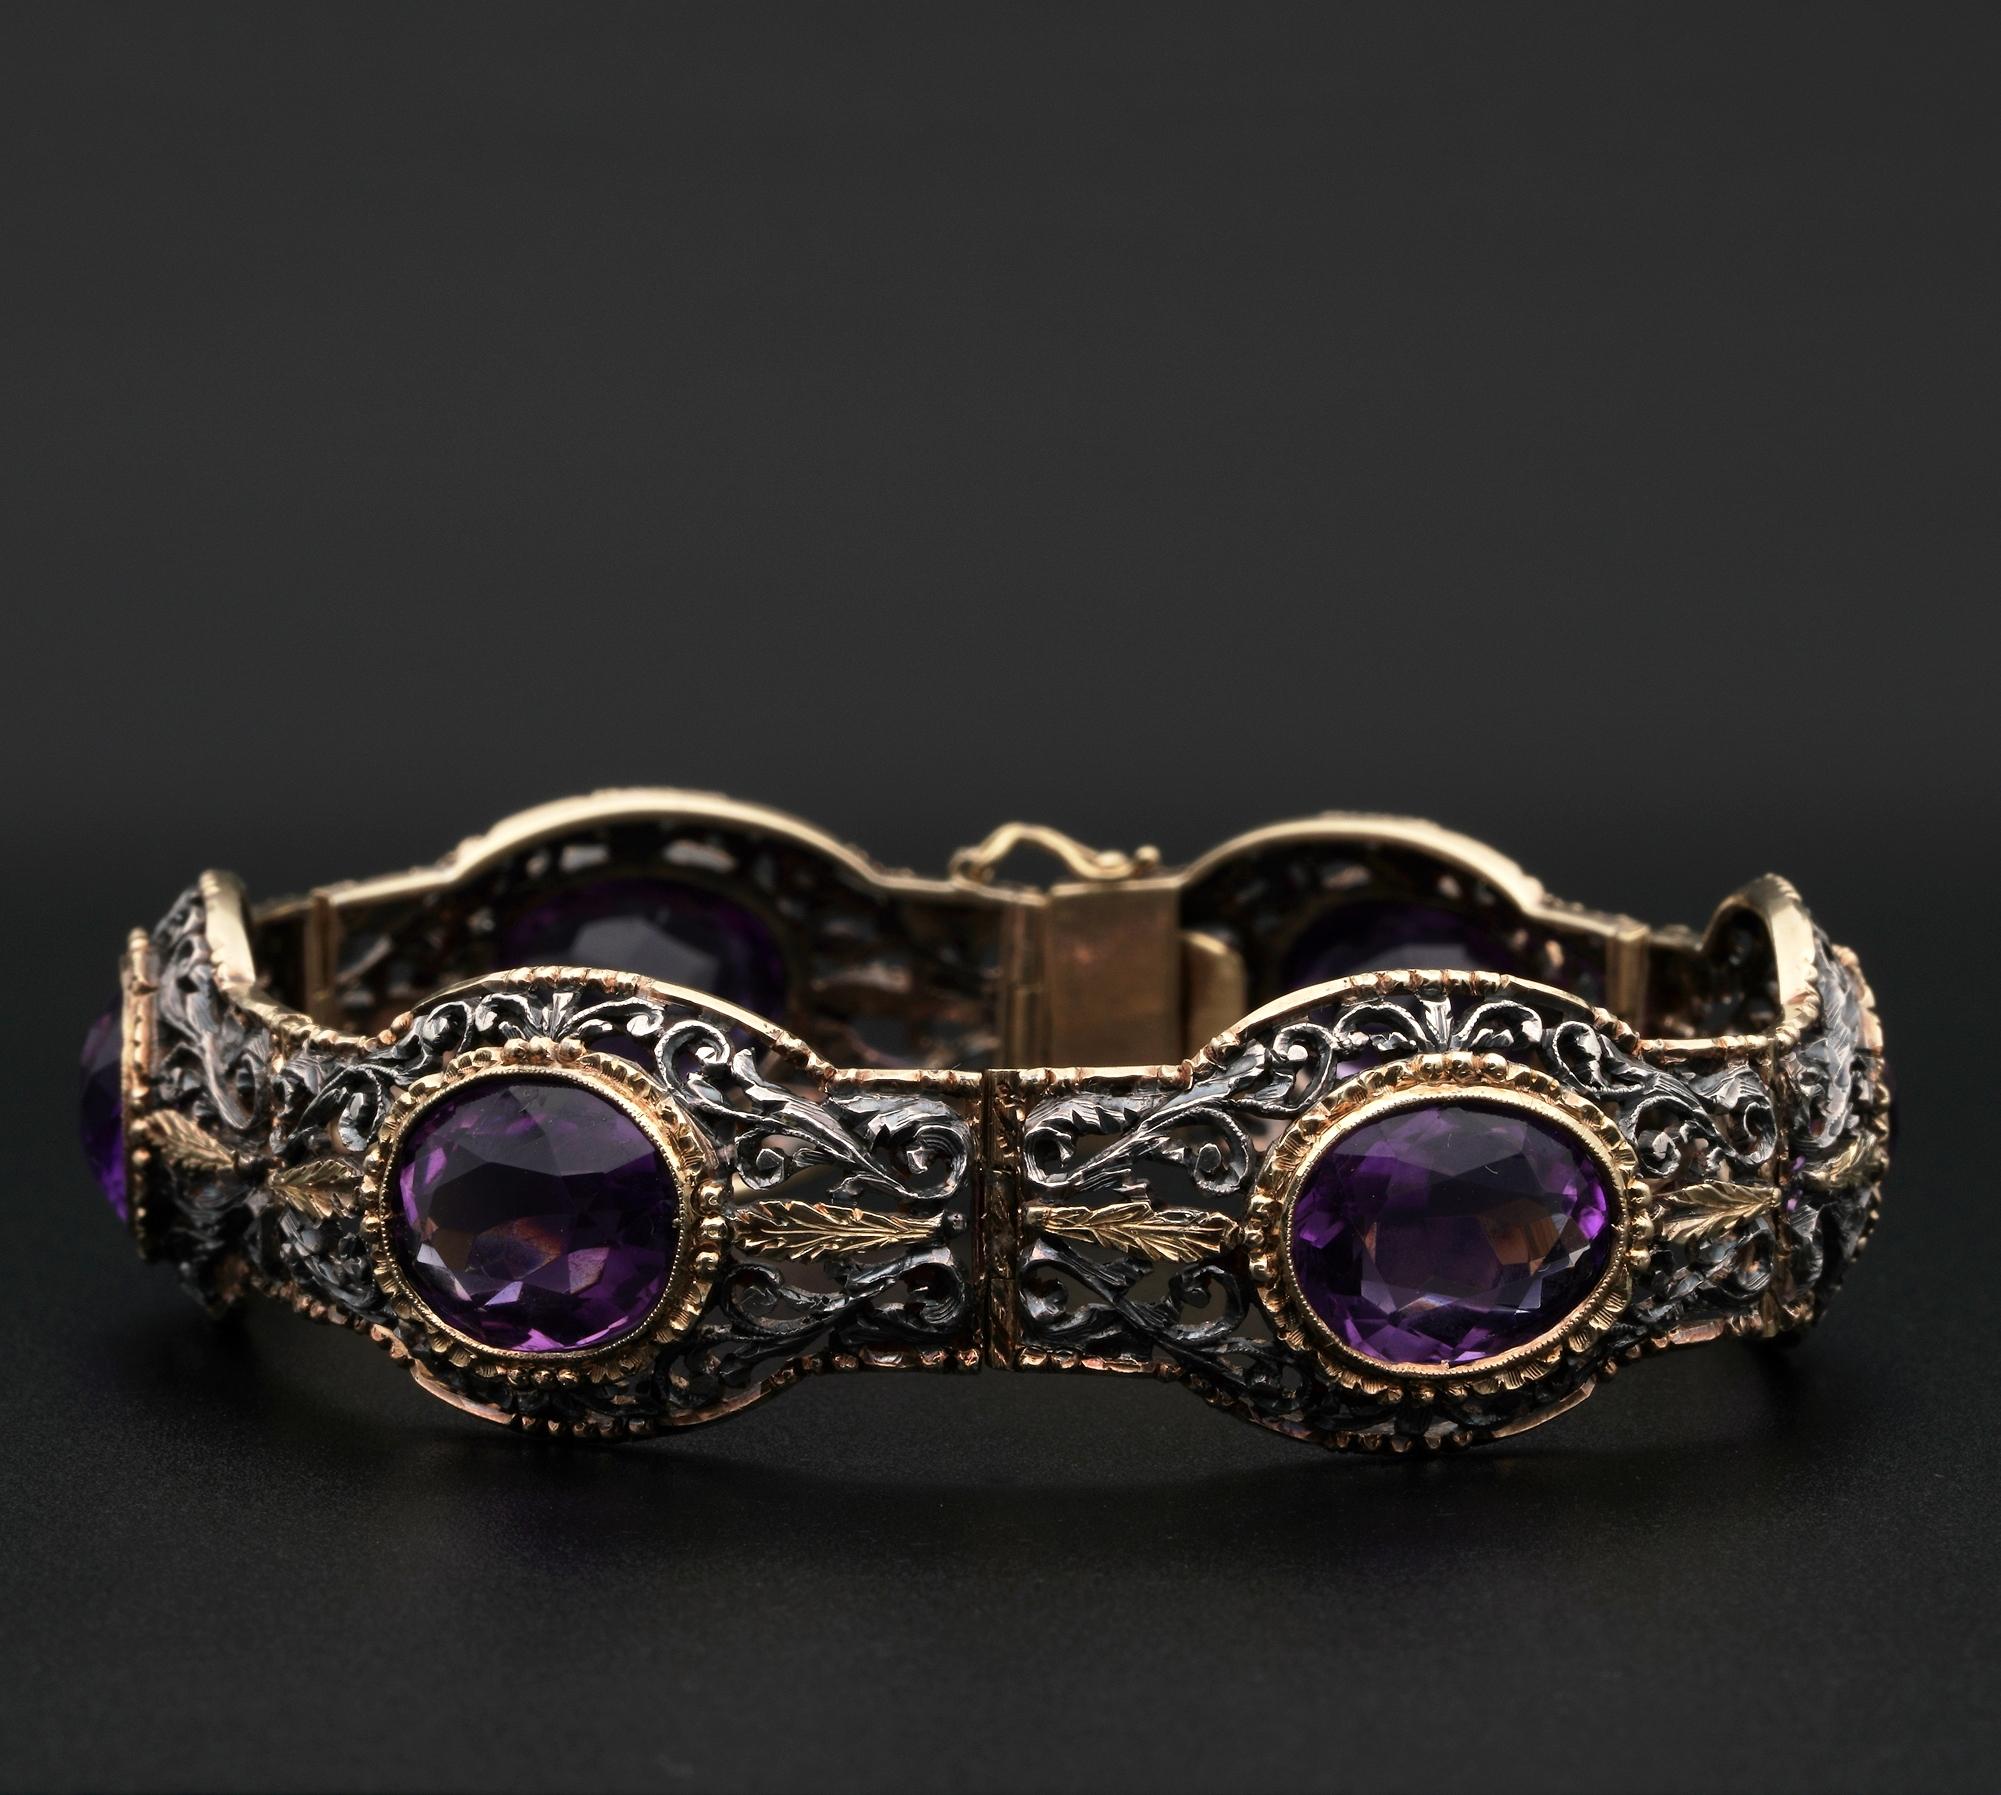 Rare Treasure

Not easy to come across antique bold pieces as beautiful as this bracelet
Edwardian masterpiece, original 1900 ca all crated of solid gold with some portions overlaid in silver creating amazing contrast, both acid tested and